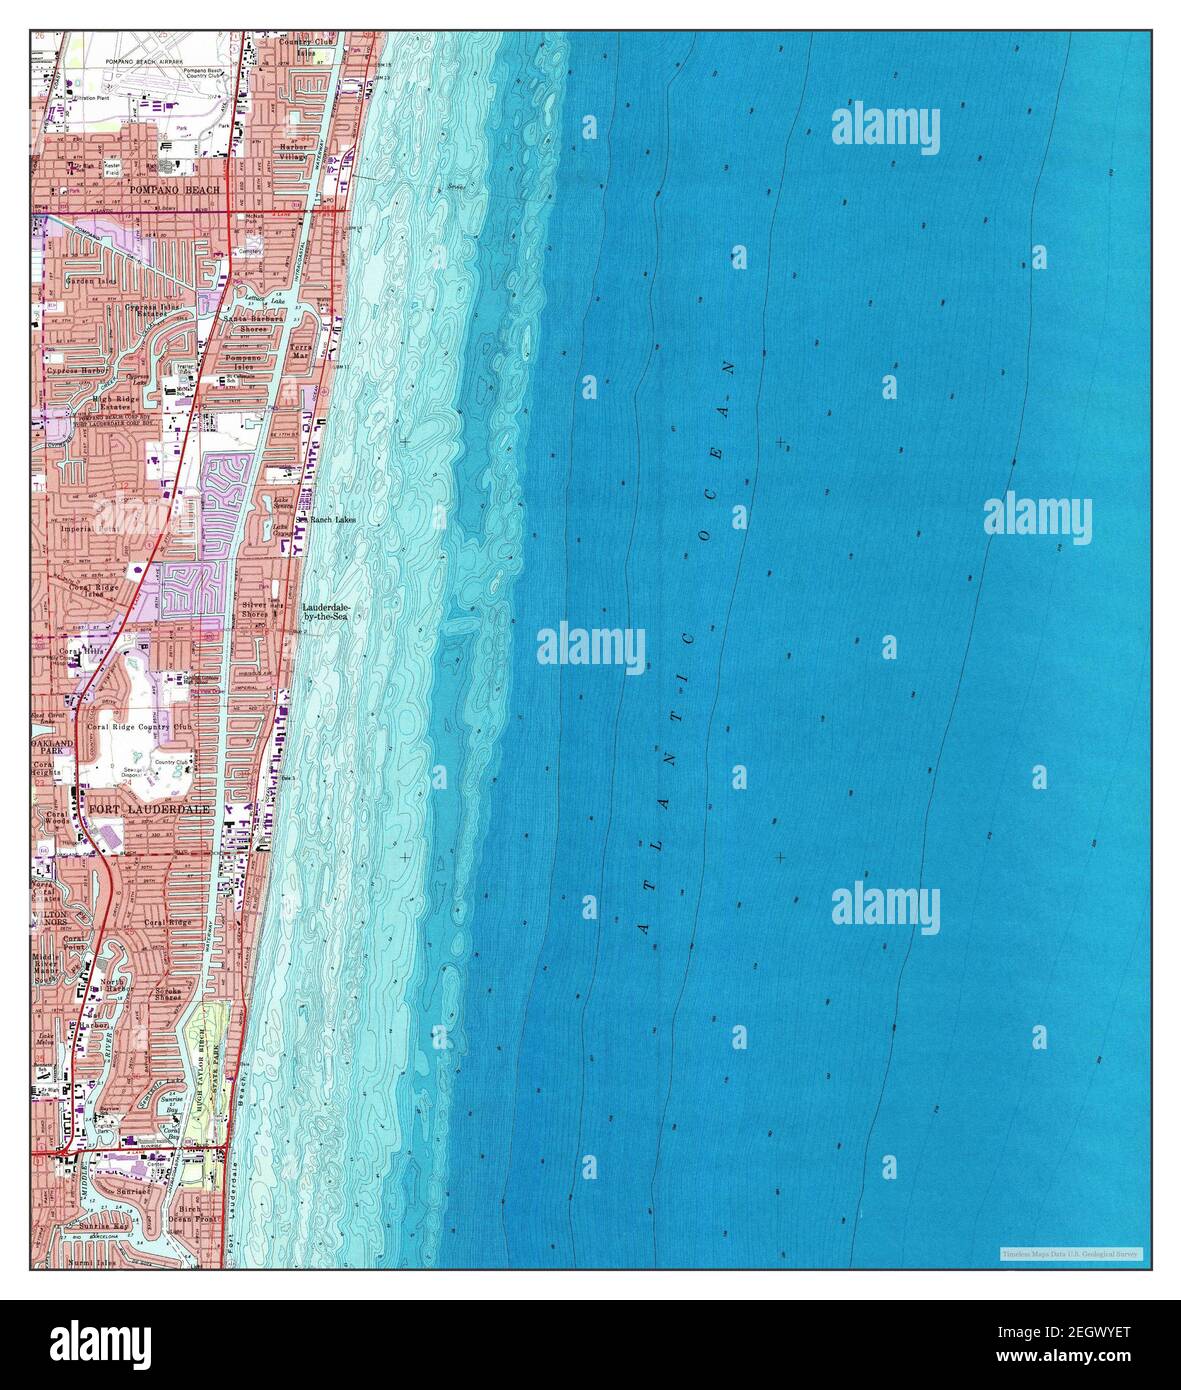 Florida pompano beach Cut Out Stock Images & Pictures - Alamy